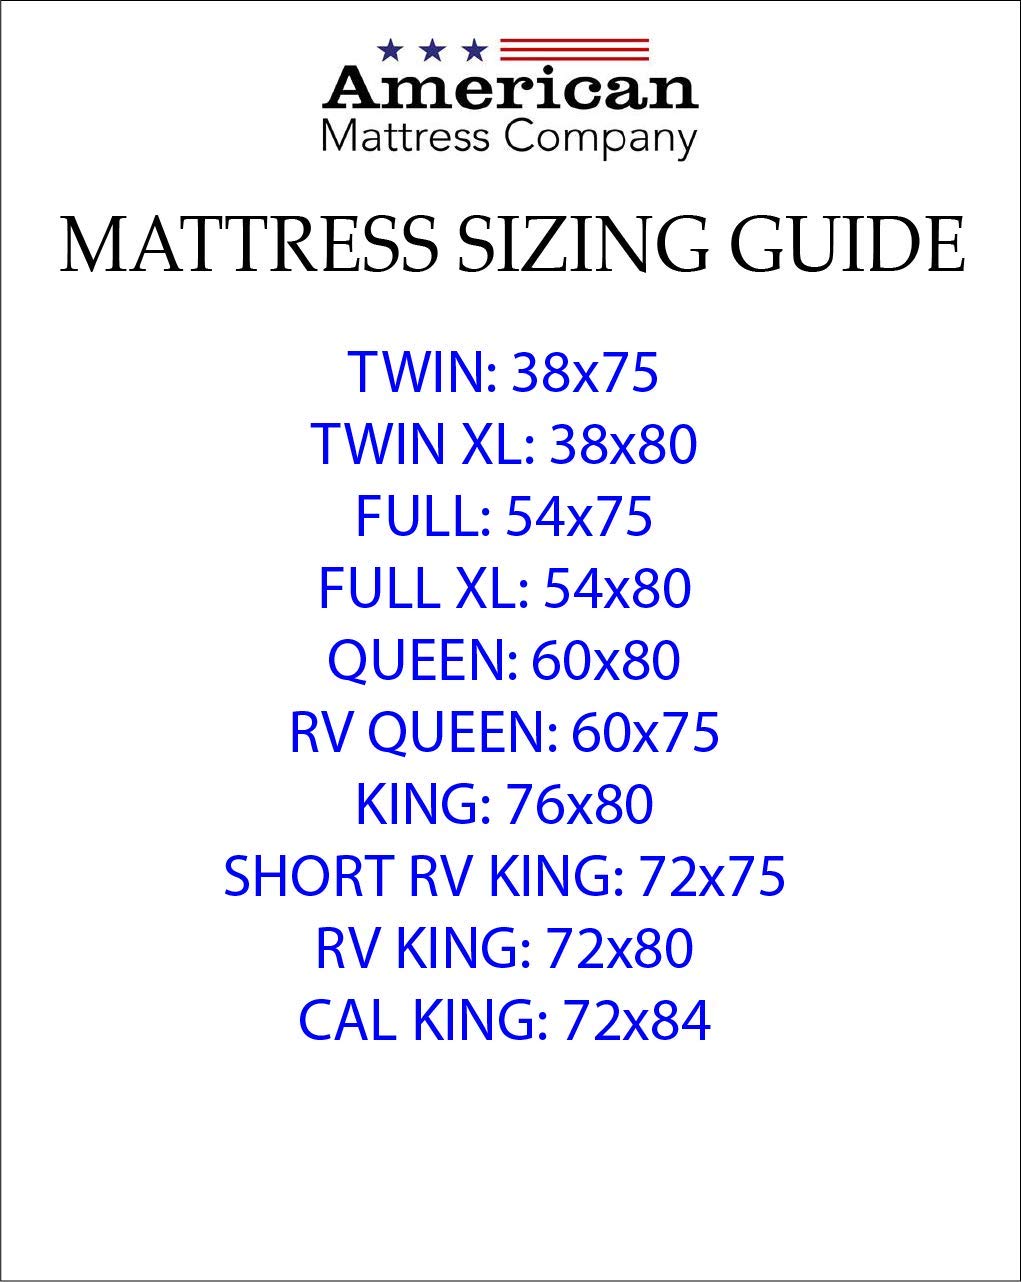 American Mattress Company 6" Graphite Infused Memory Foam-Sleeps Cooler-100% Made in The USA-Medium Firm (Short King - 72x75)